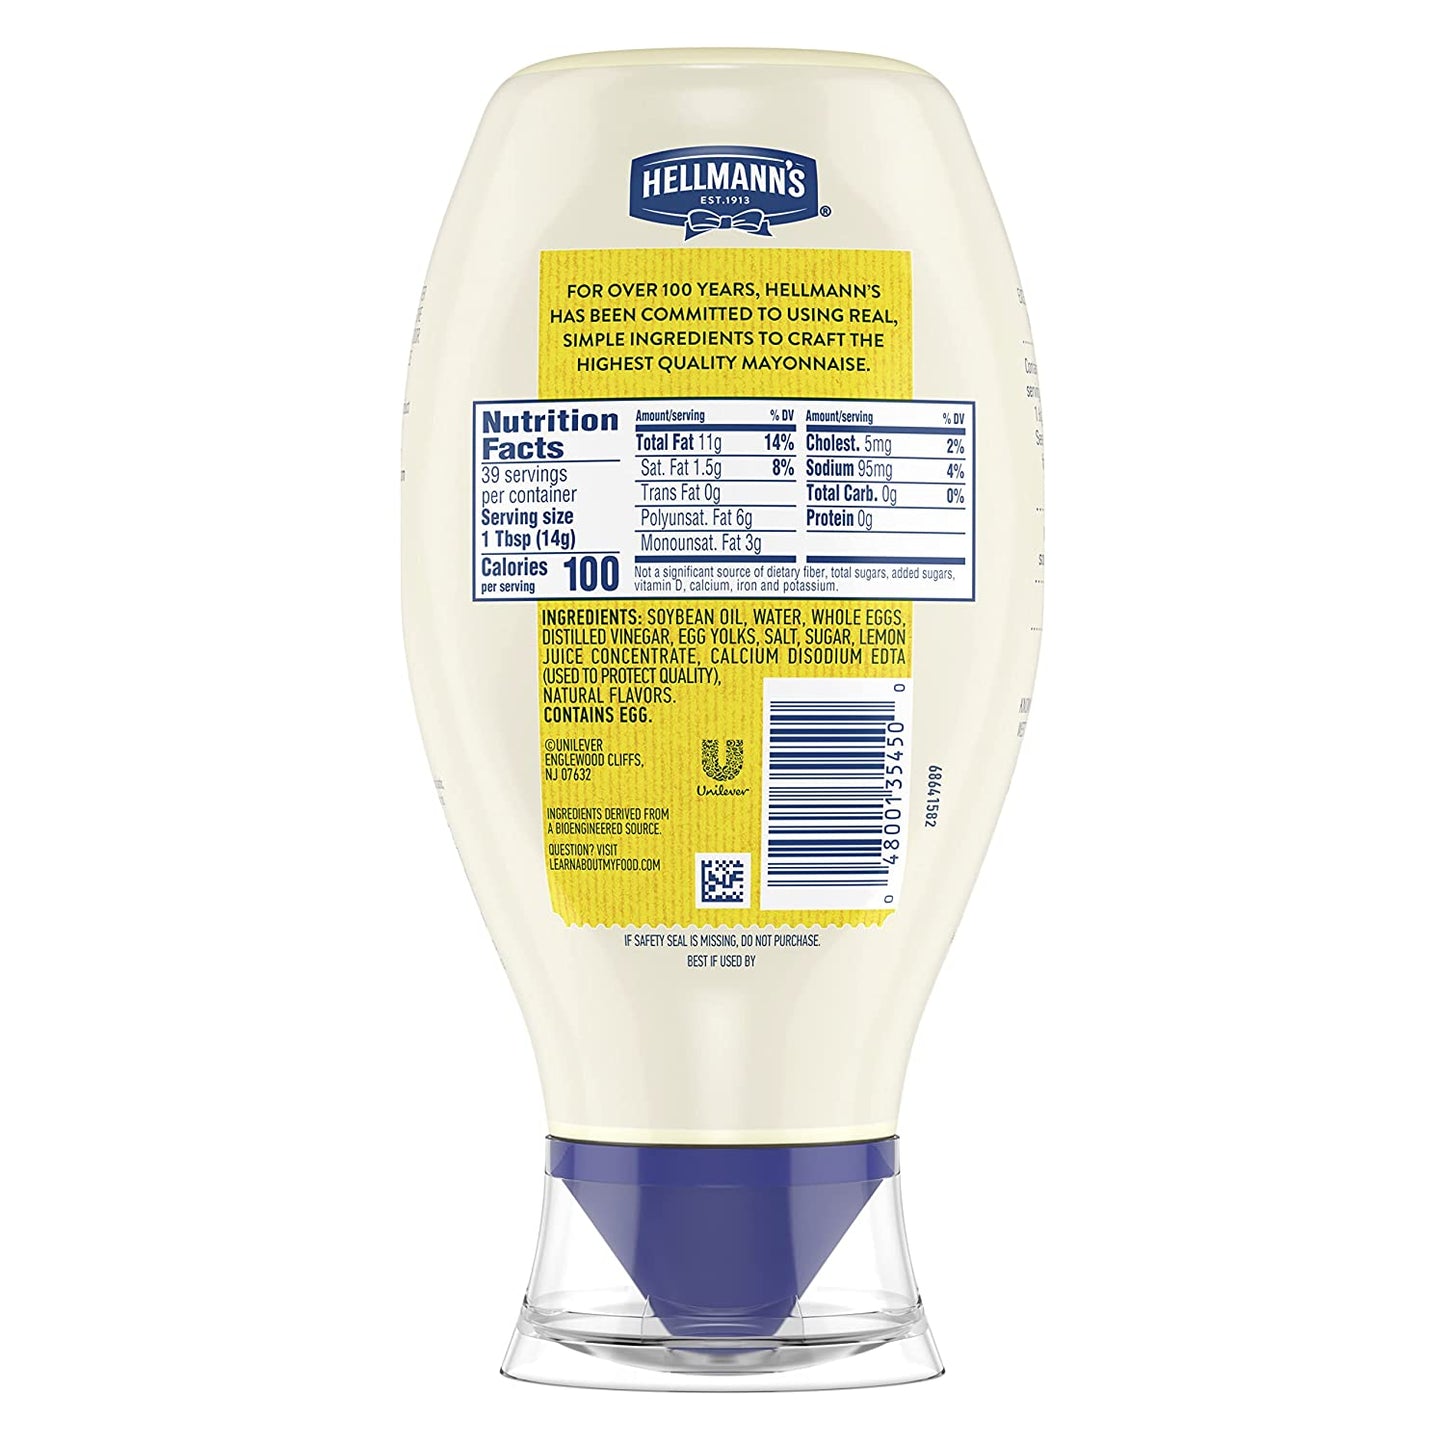 Hellmann's Real Mayonnaise For a Rich Creamy Condiment Real Mayo Squeeze Bottle Gluten Free, Made With 100% Cage-Free Eggs 20 oz, Pack of 6